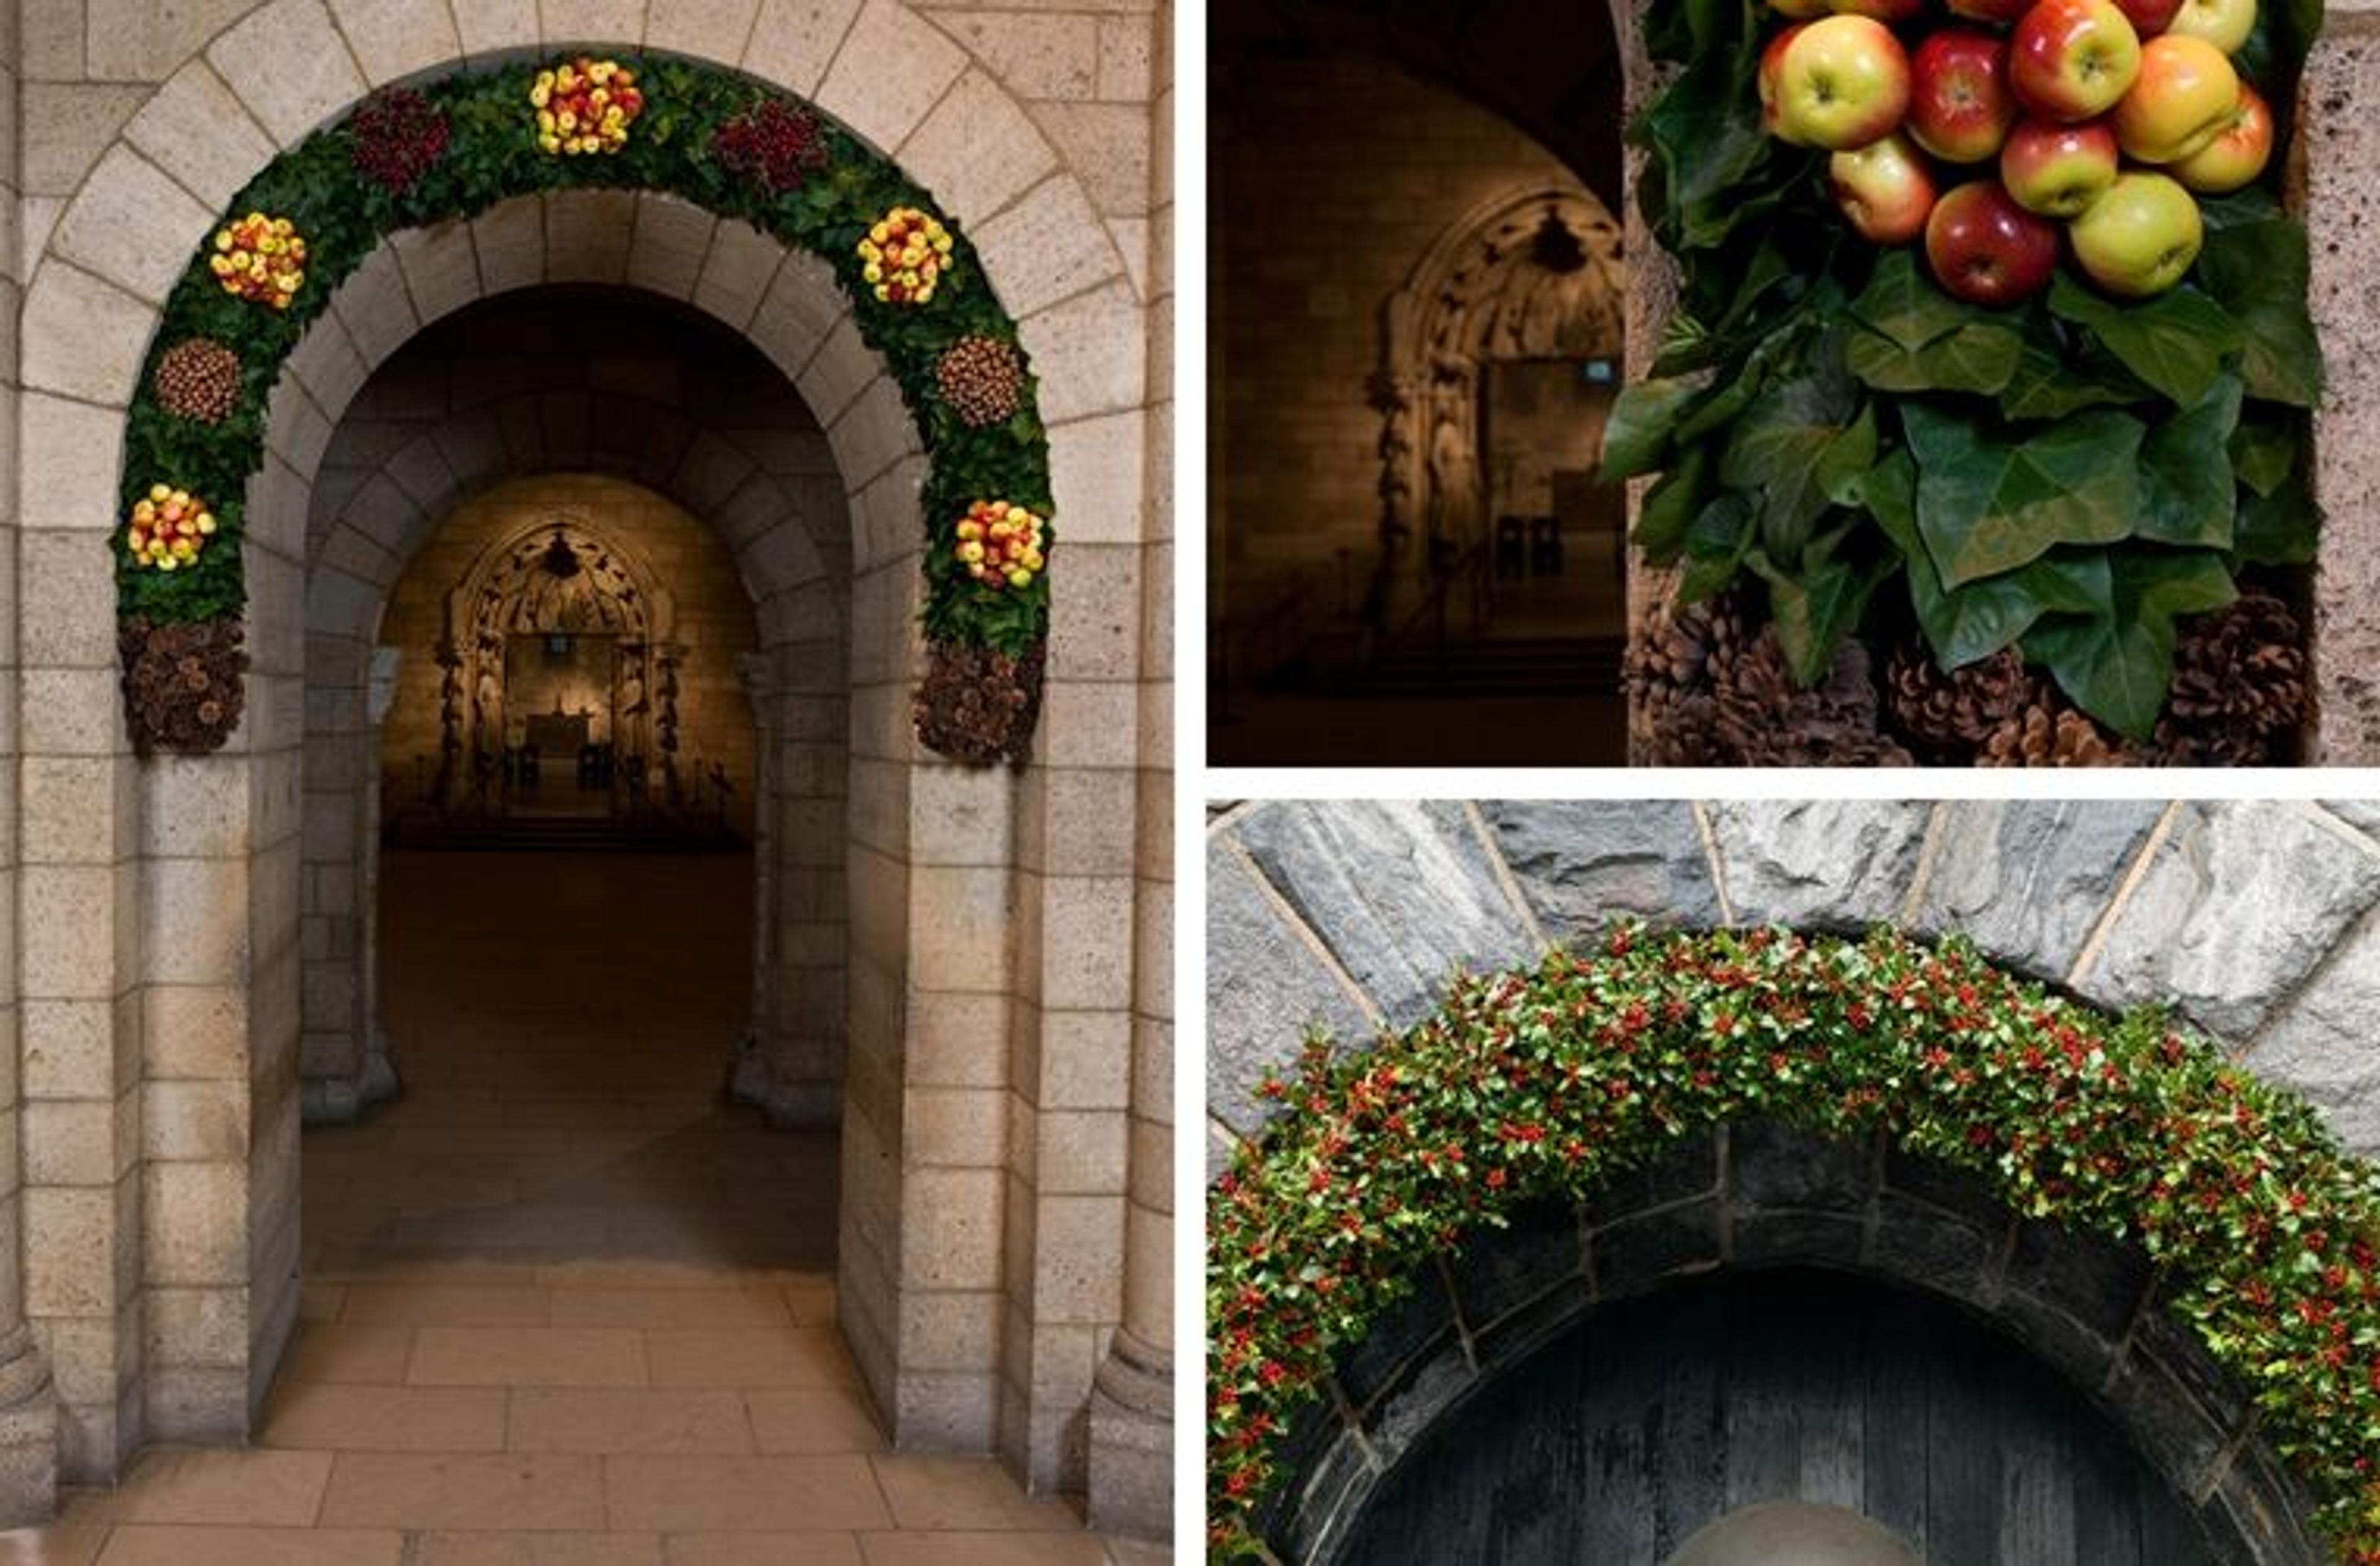 Three views of winter-themed holiday decorations at The Met Cloisters